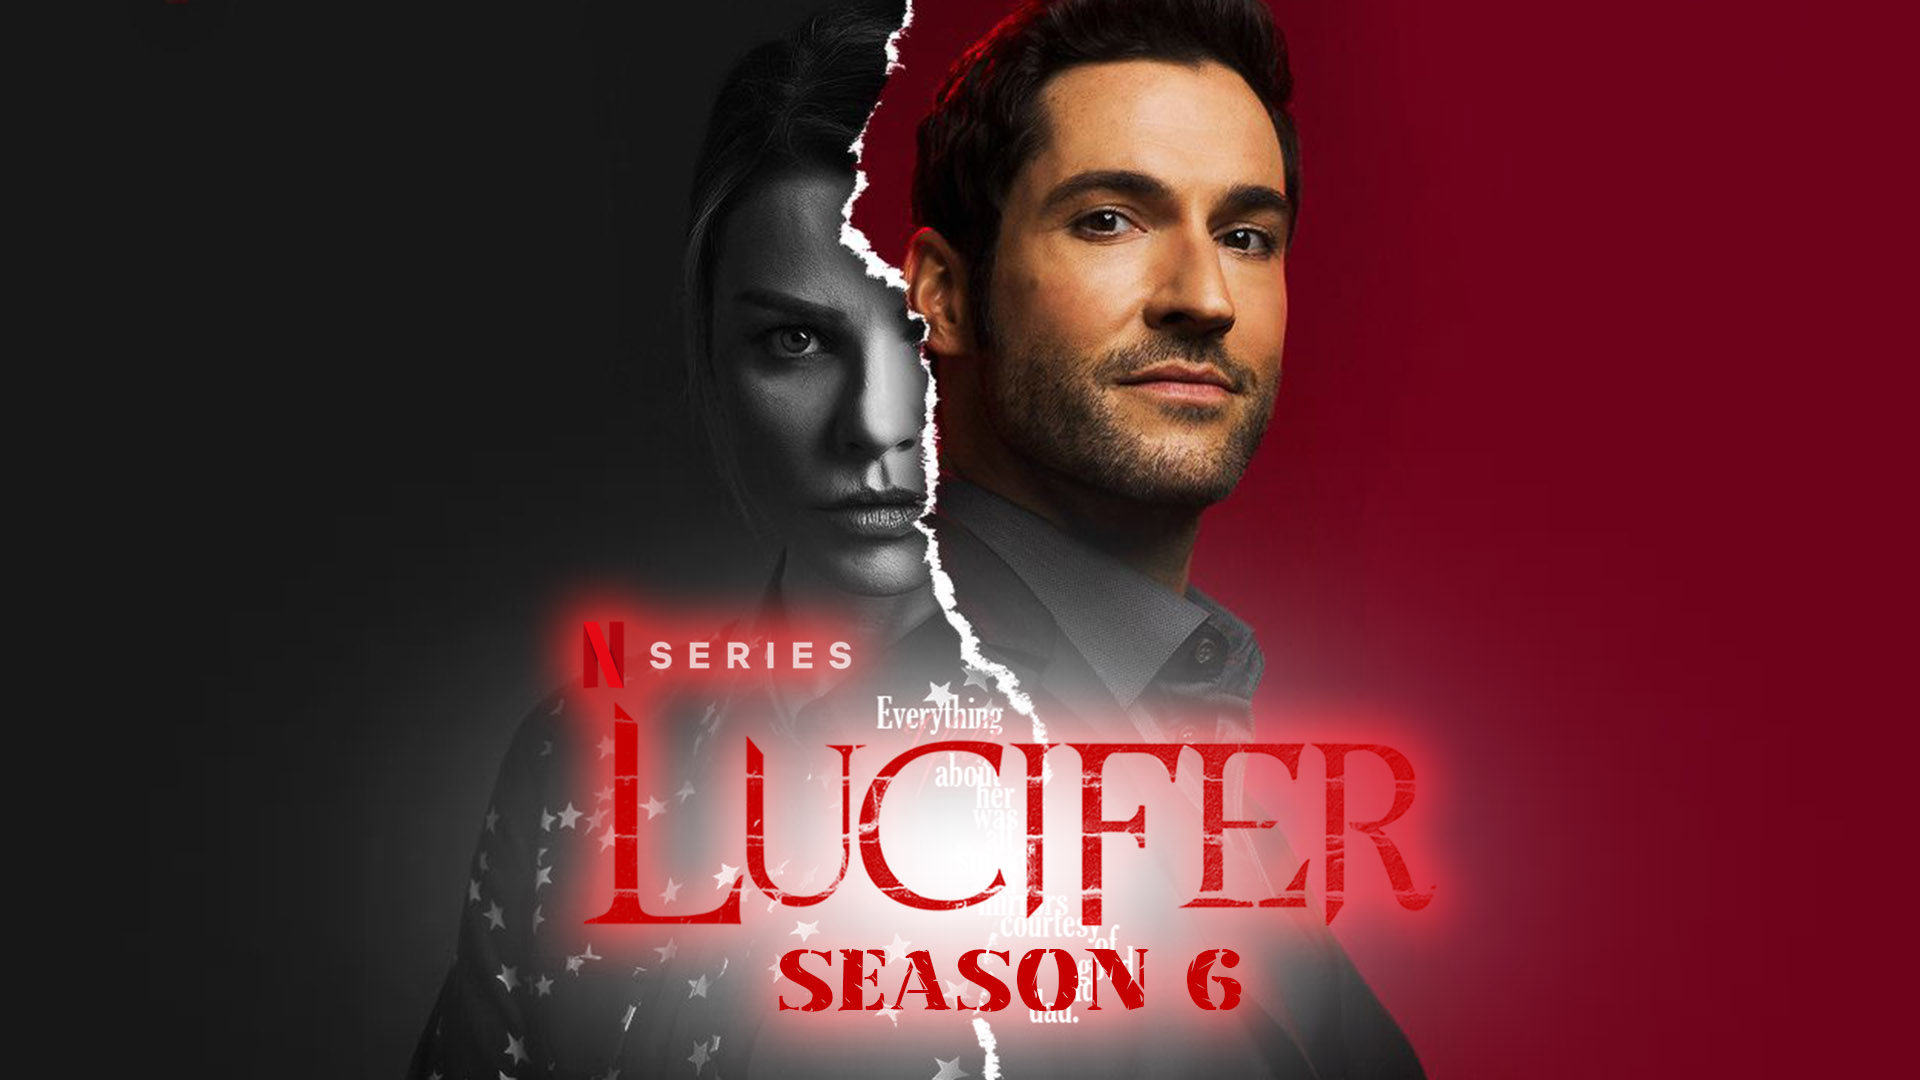 Read more about the article Lucifer season 6 Web Series Download in hindi 480p, 720p, 1080p Filmywap, Filmyzilla, Tamilrockers, 123mkv